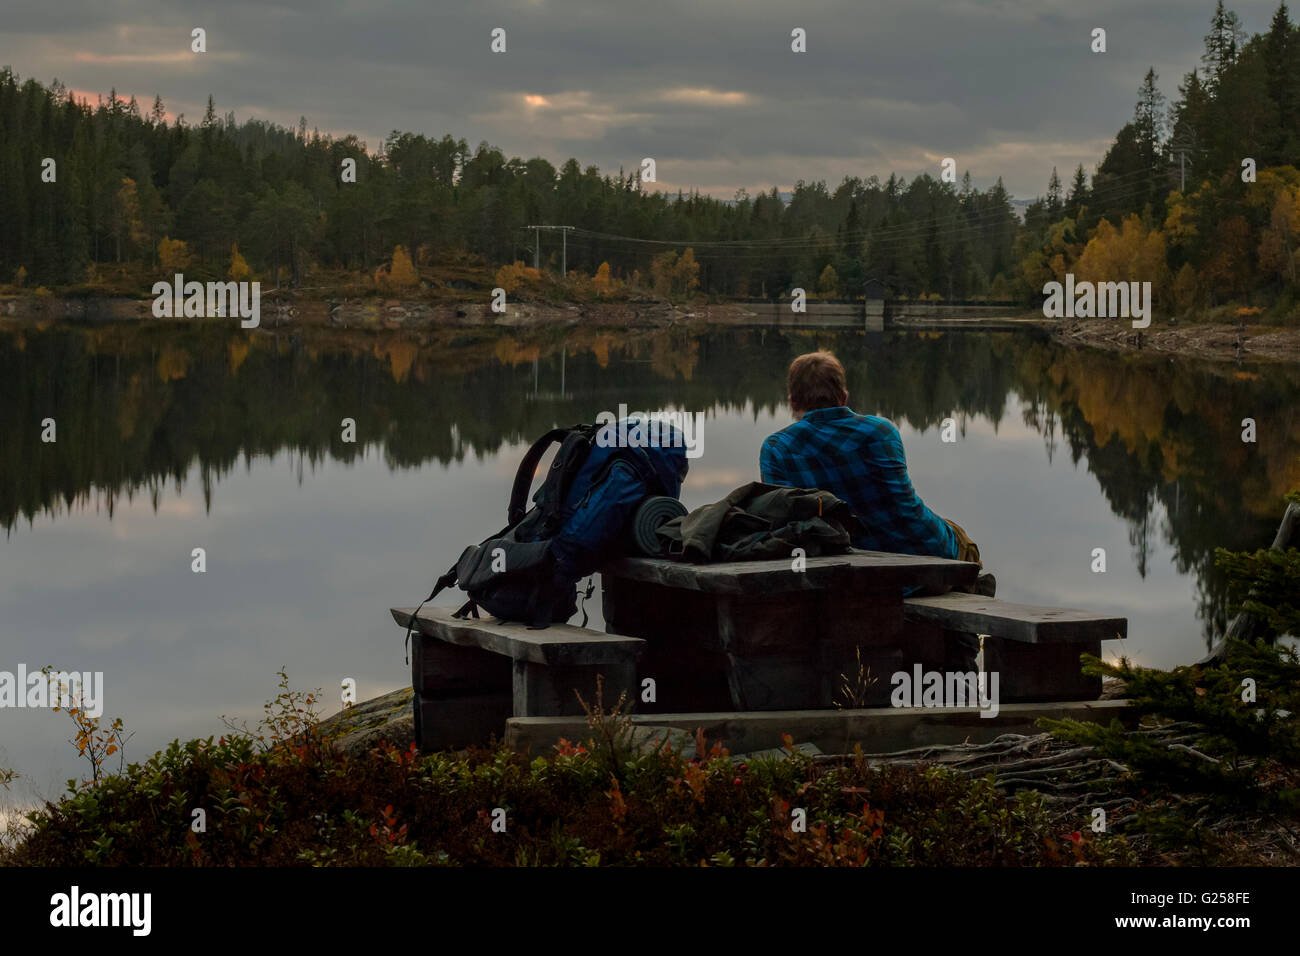 Hiker resting on bench by a lake Stock Photo